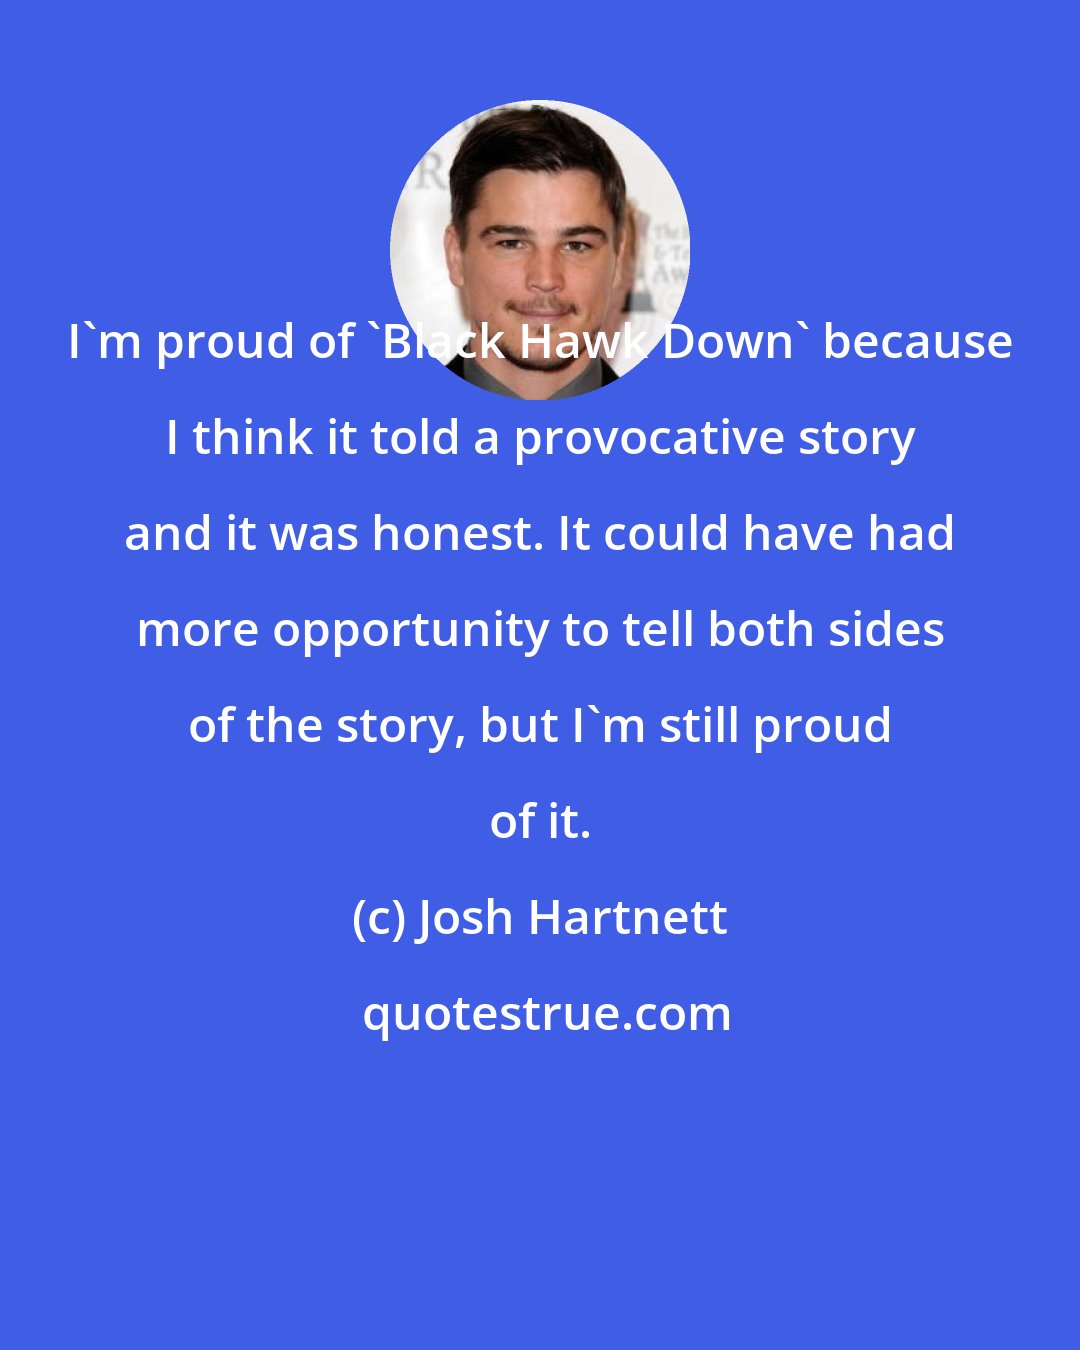 Josh Hartnett: I'm proud of 'Black Hawk Down' because I think it told a provocative story and it was honest. It could have had more opportunity to tell both sides of the story, but I'm still proud of it.